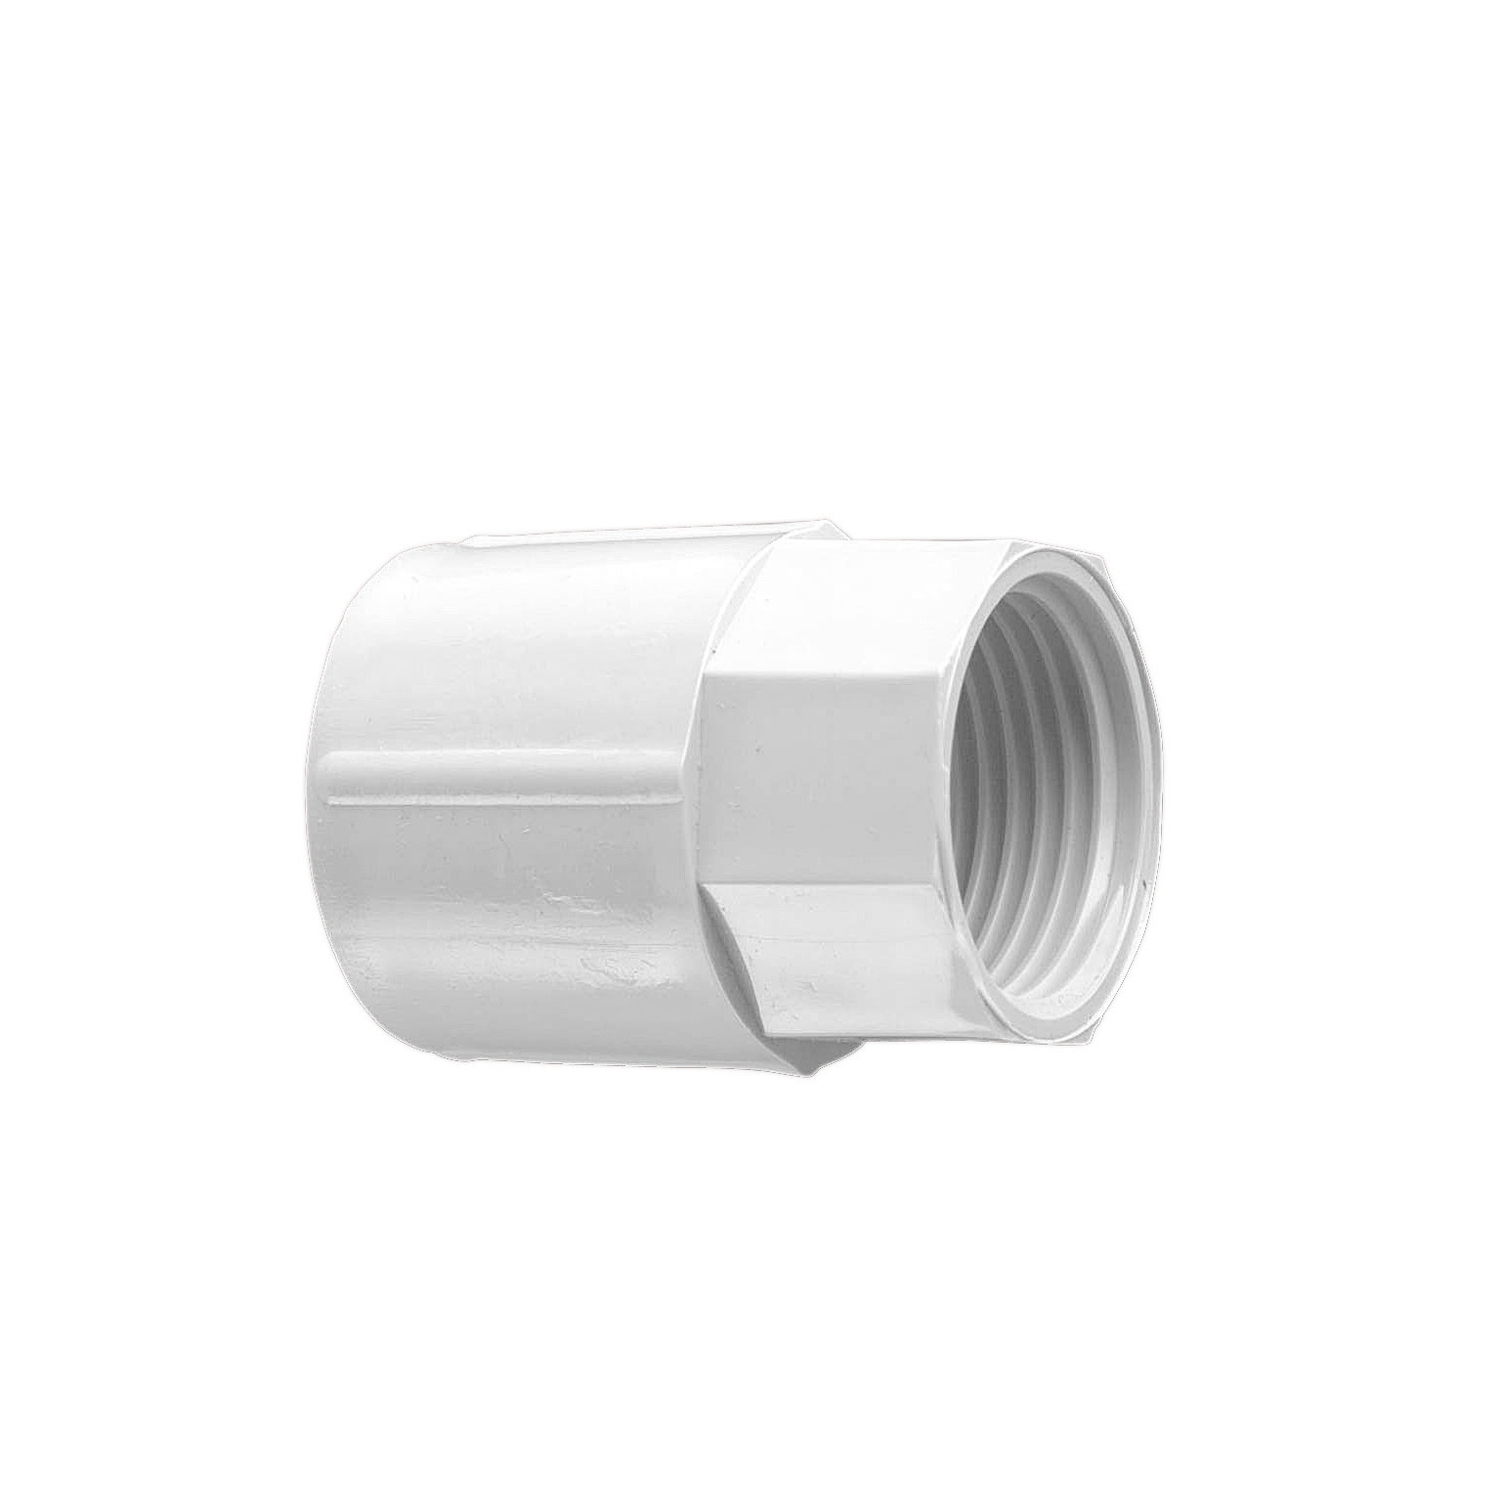 Solid Fittings - PVC, Plain To Screwed Couplings, 20mm, Grey